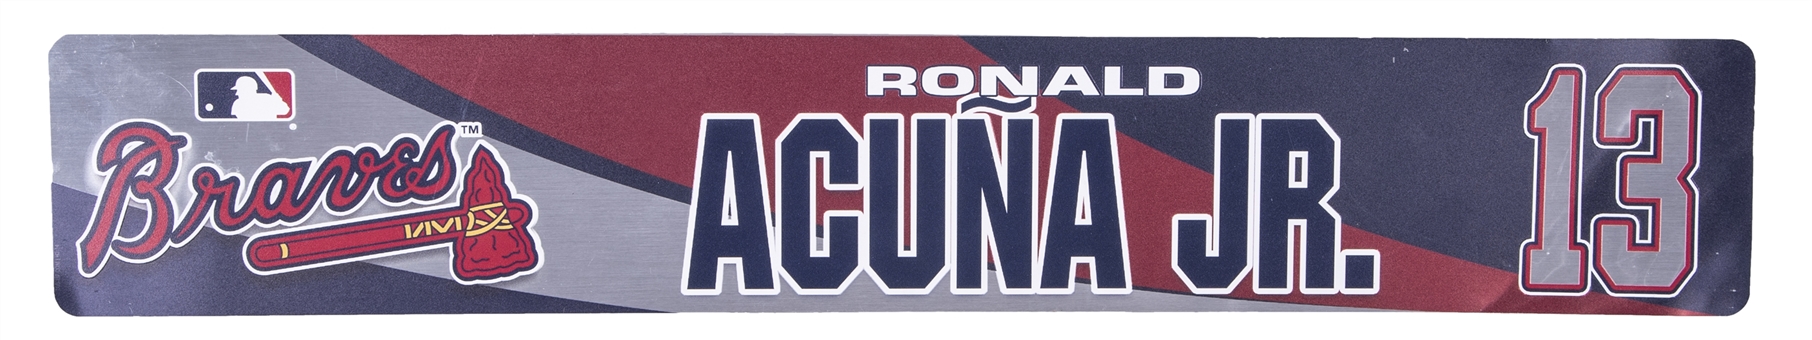 2018 Ronald Acuna Home Debut Used Atlanta Braves Locker Name Plate (MLB Authenticated)